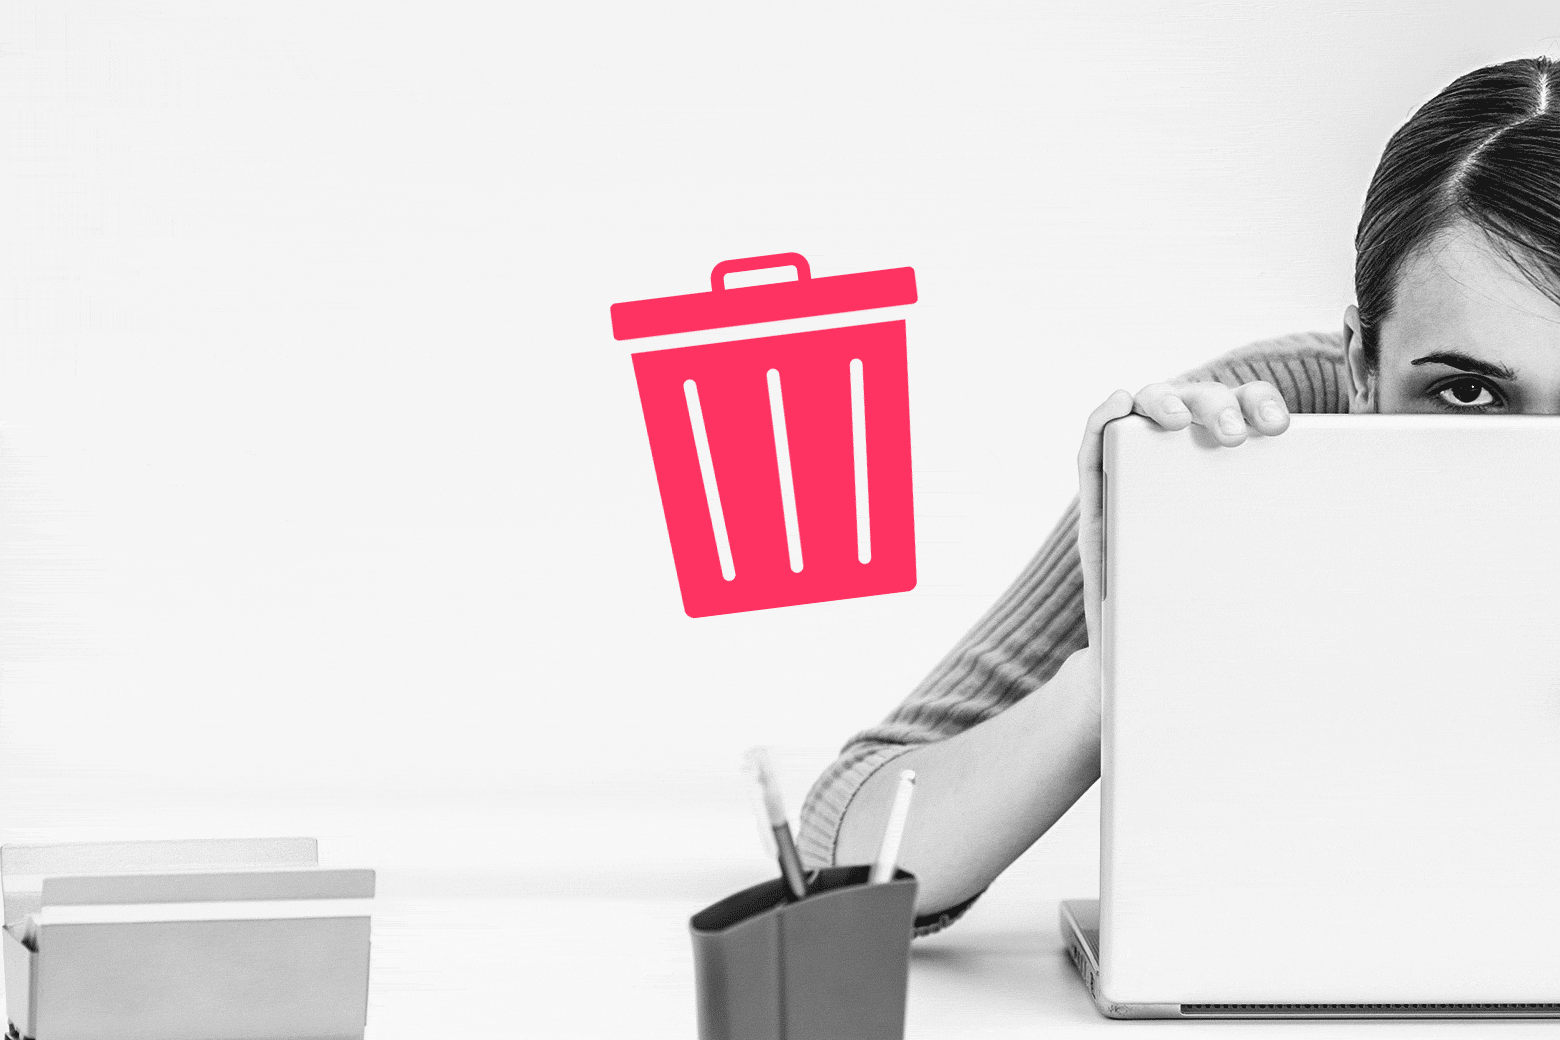 Dear Prudence: I pretended to be my husband over email to swat away his thirsty ex.